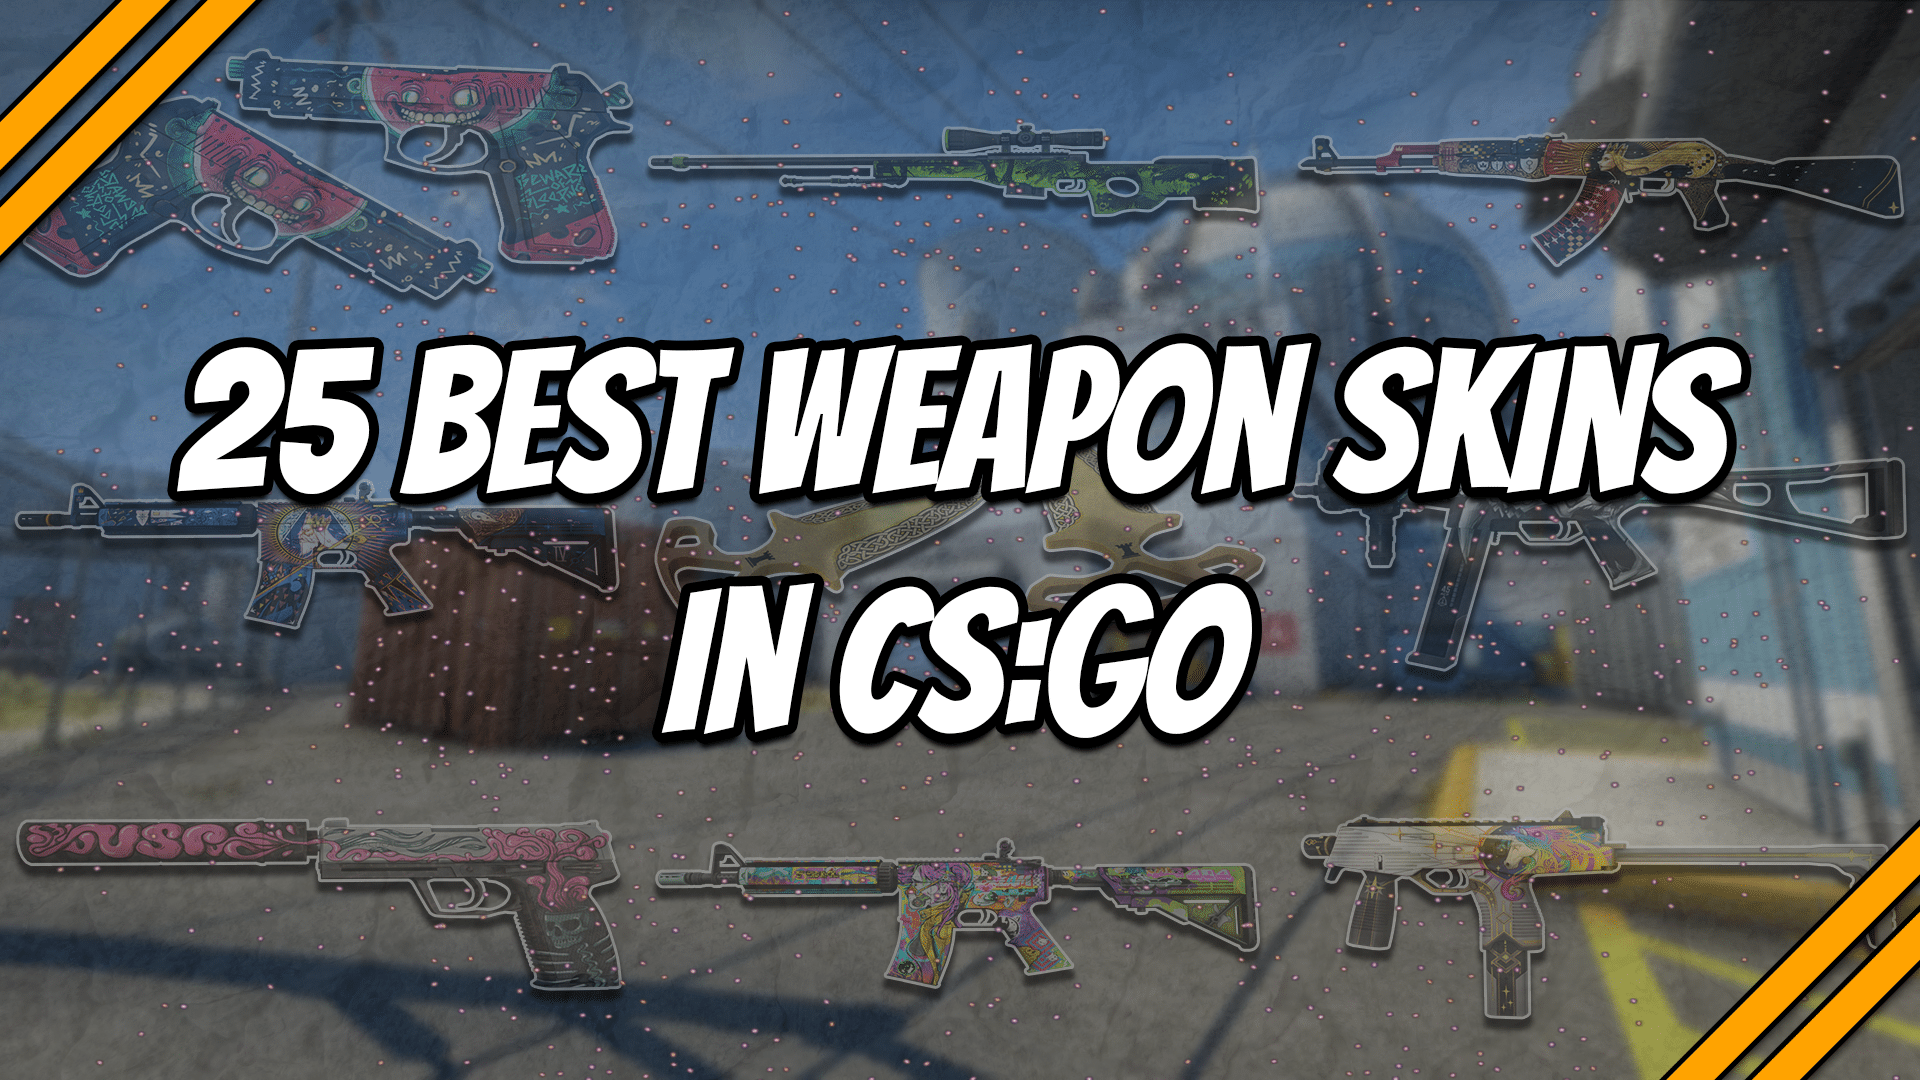 25 Best Weapon Skins in CSGO